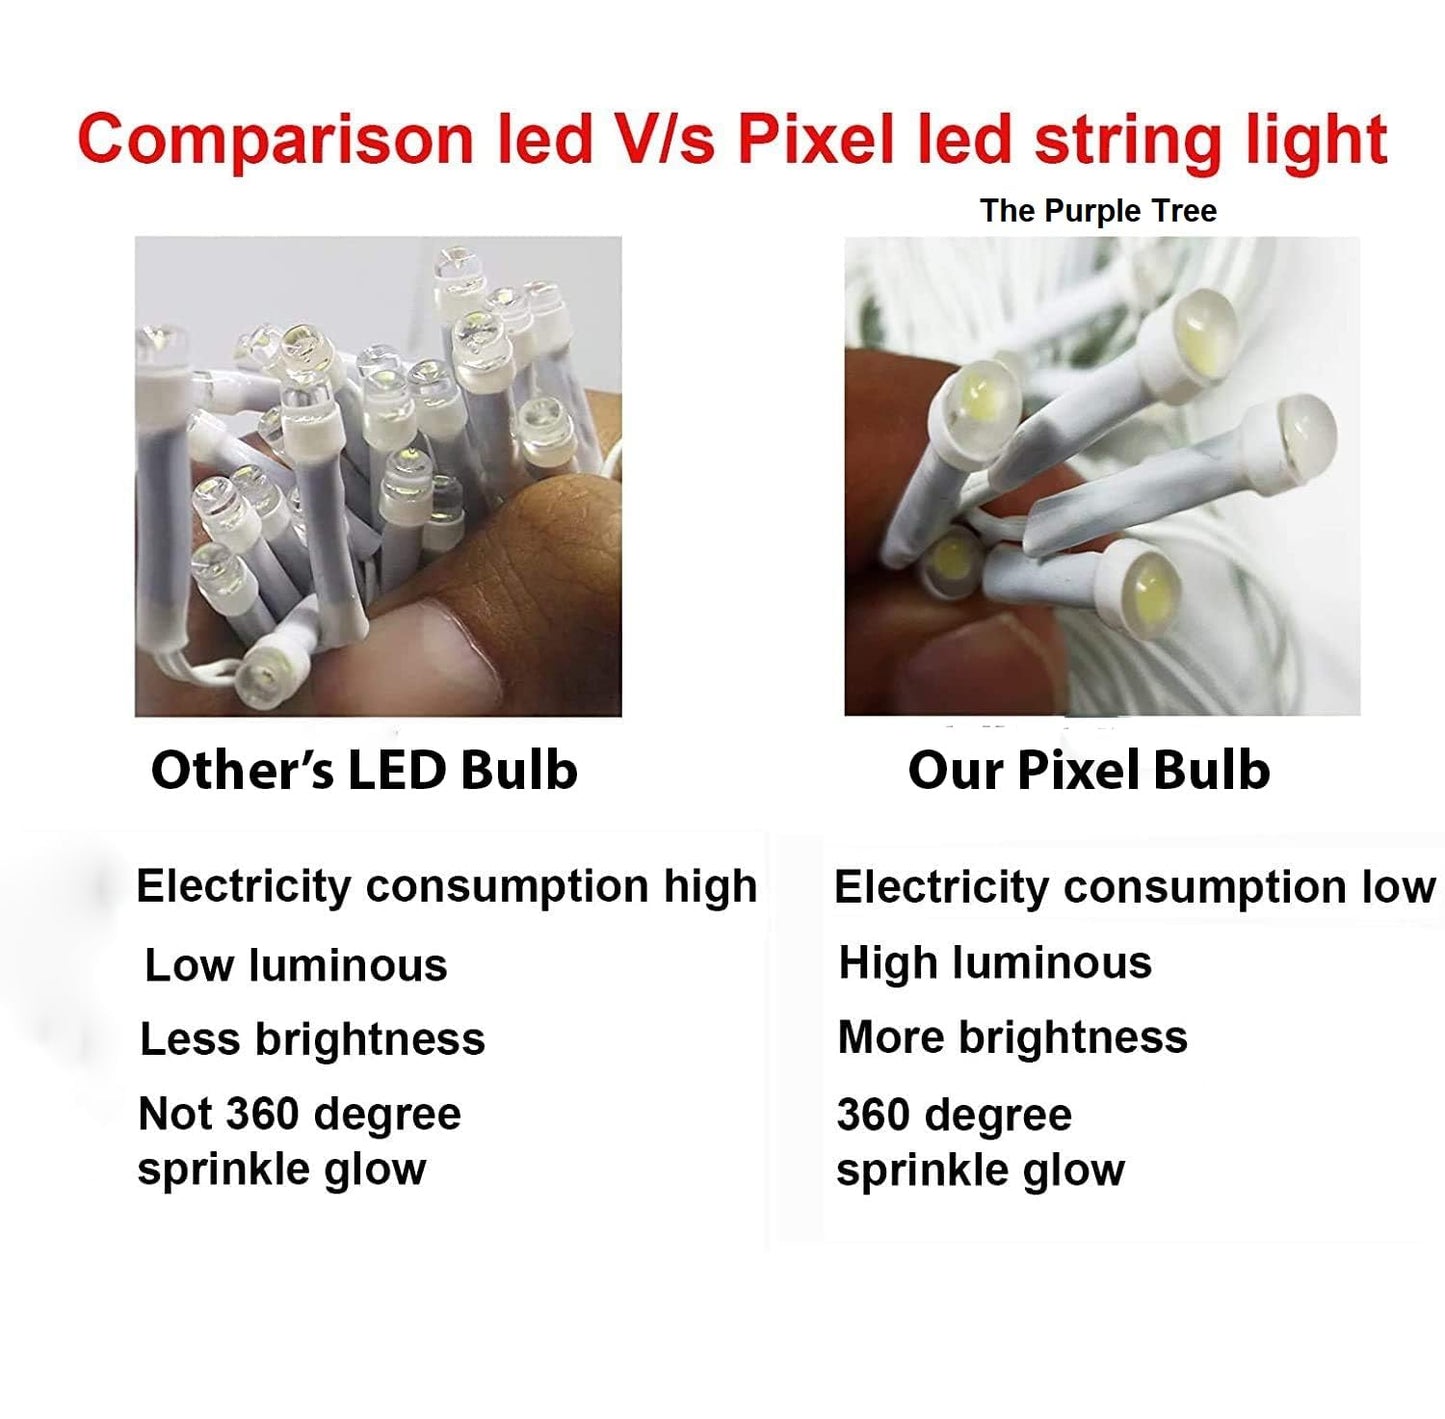 LED vs pixel LED string lights side by side, showing the difference in brightness and color options.